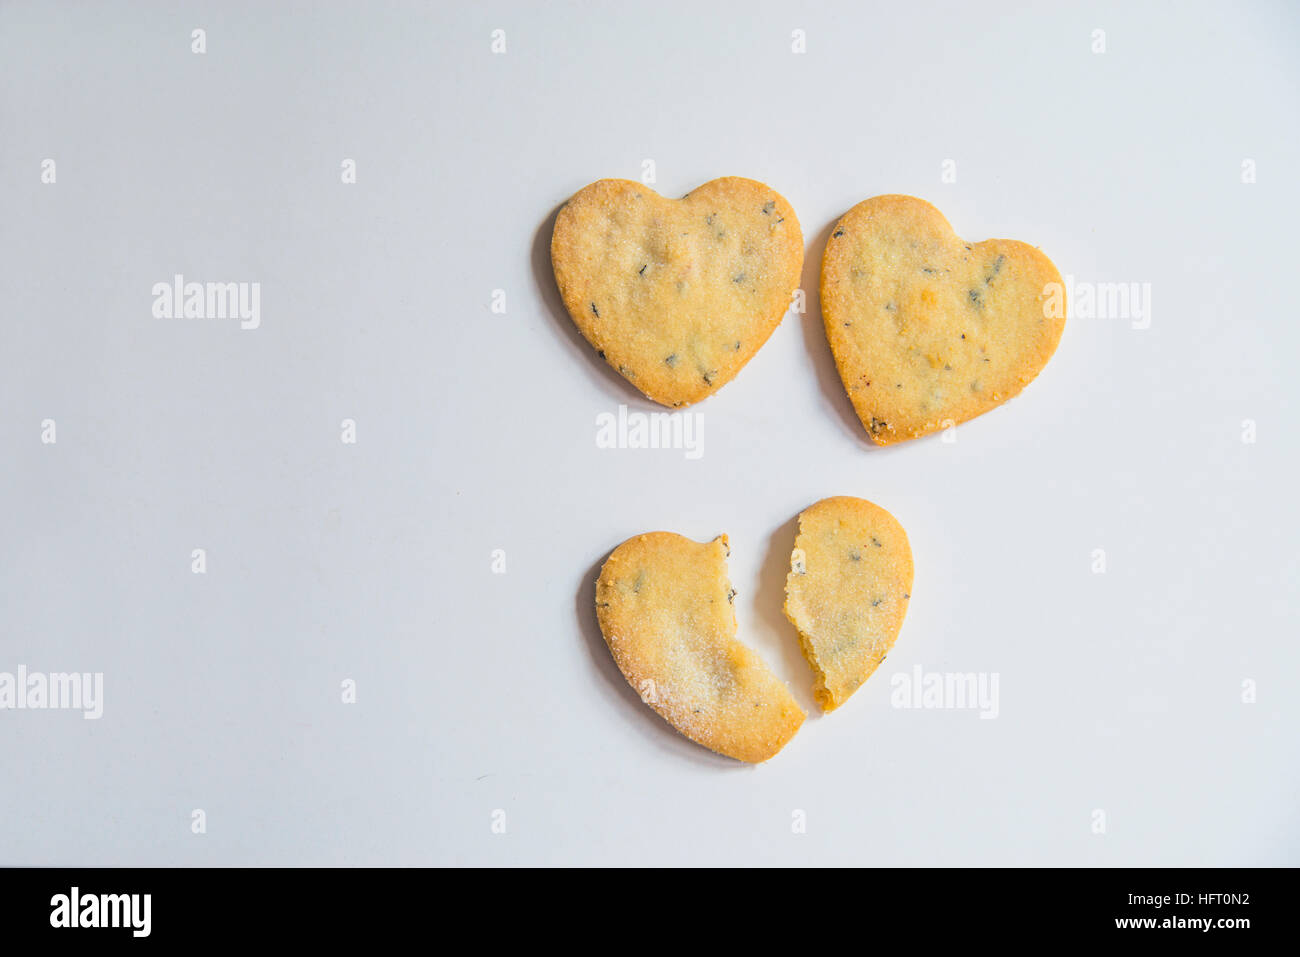 Three heart-shaped biscuits, one of them broken in two pieces. Stock Photo